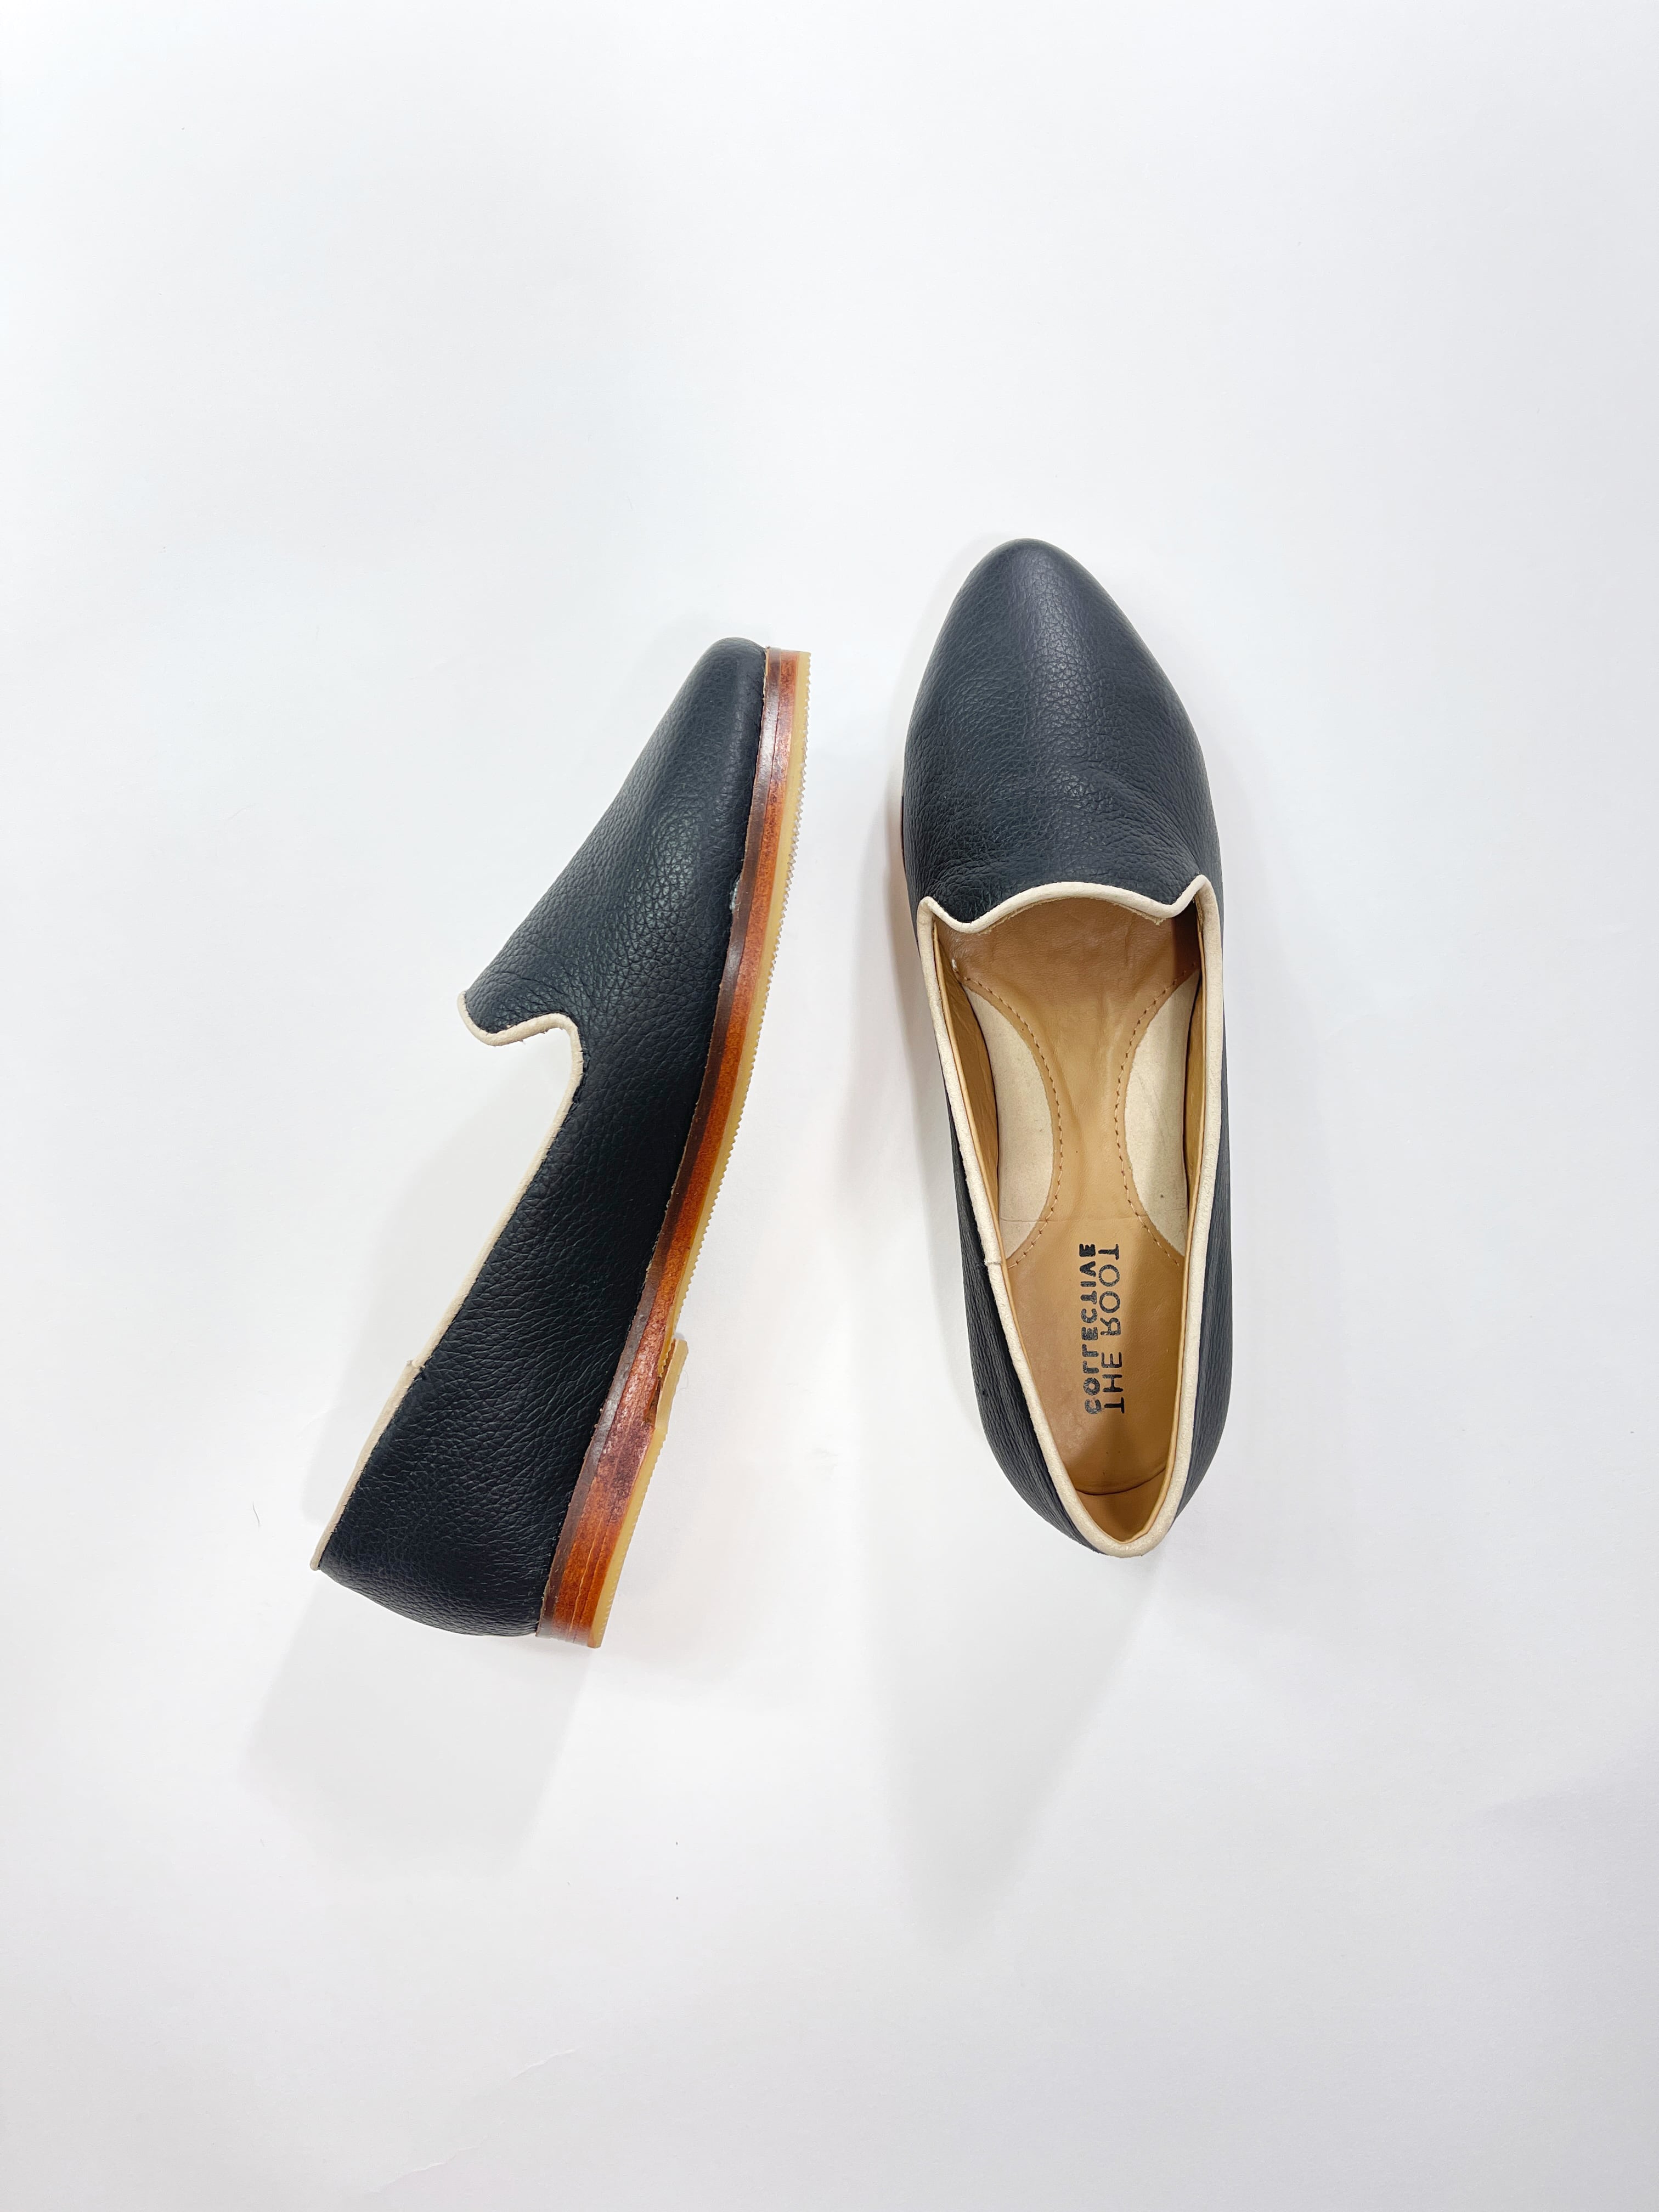 The Root Collective | Handmade Shoes. All of the compliments.